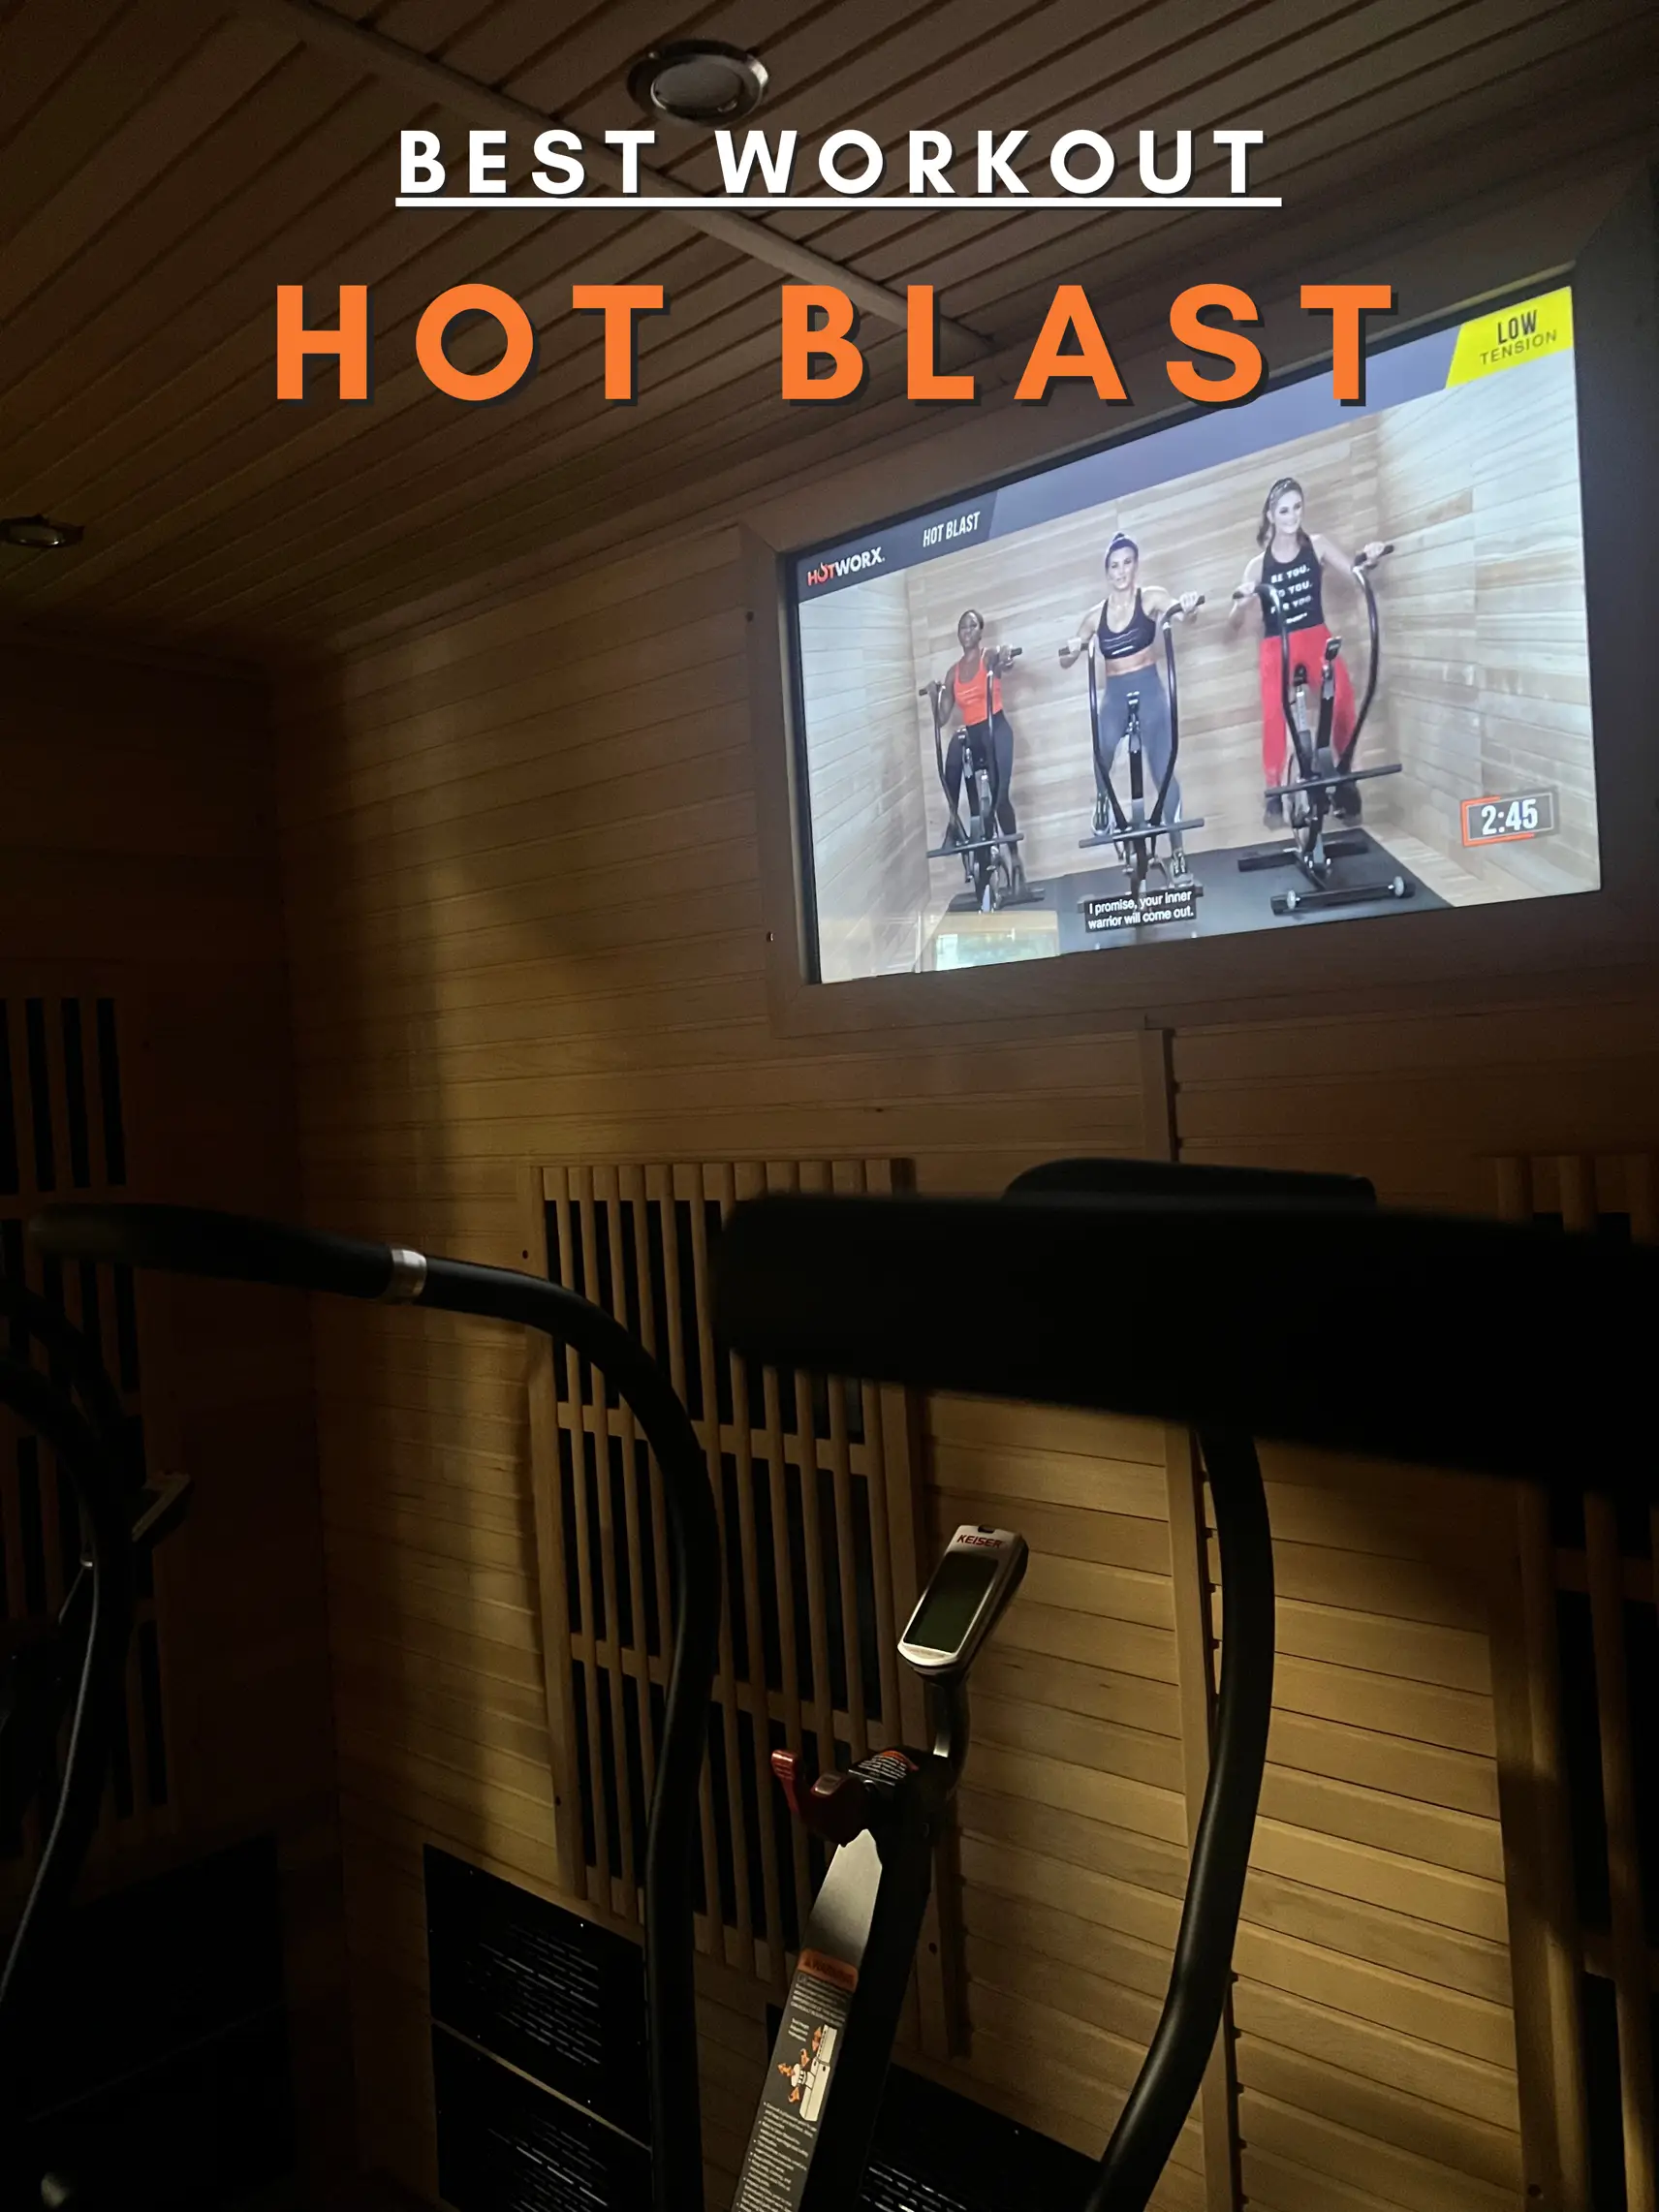 hotworx made me love working out 🔥